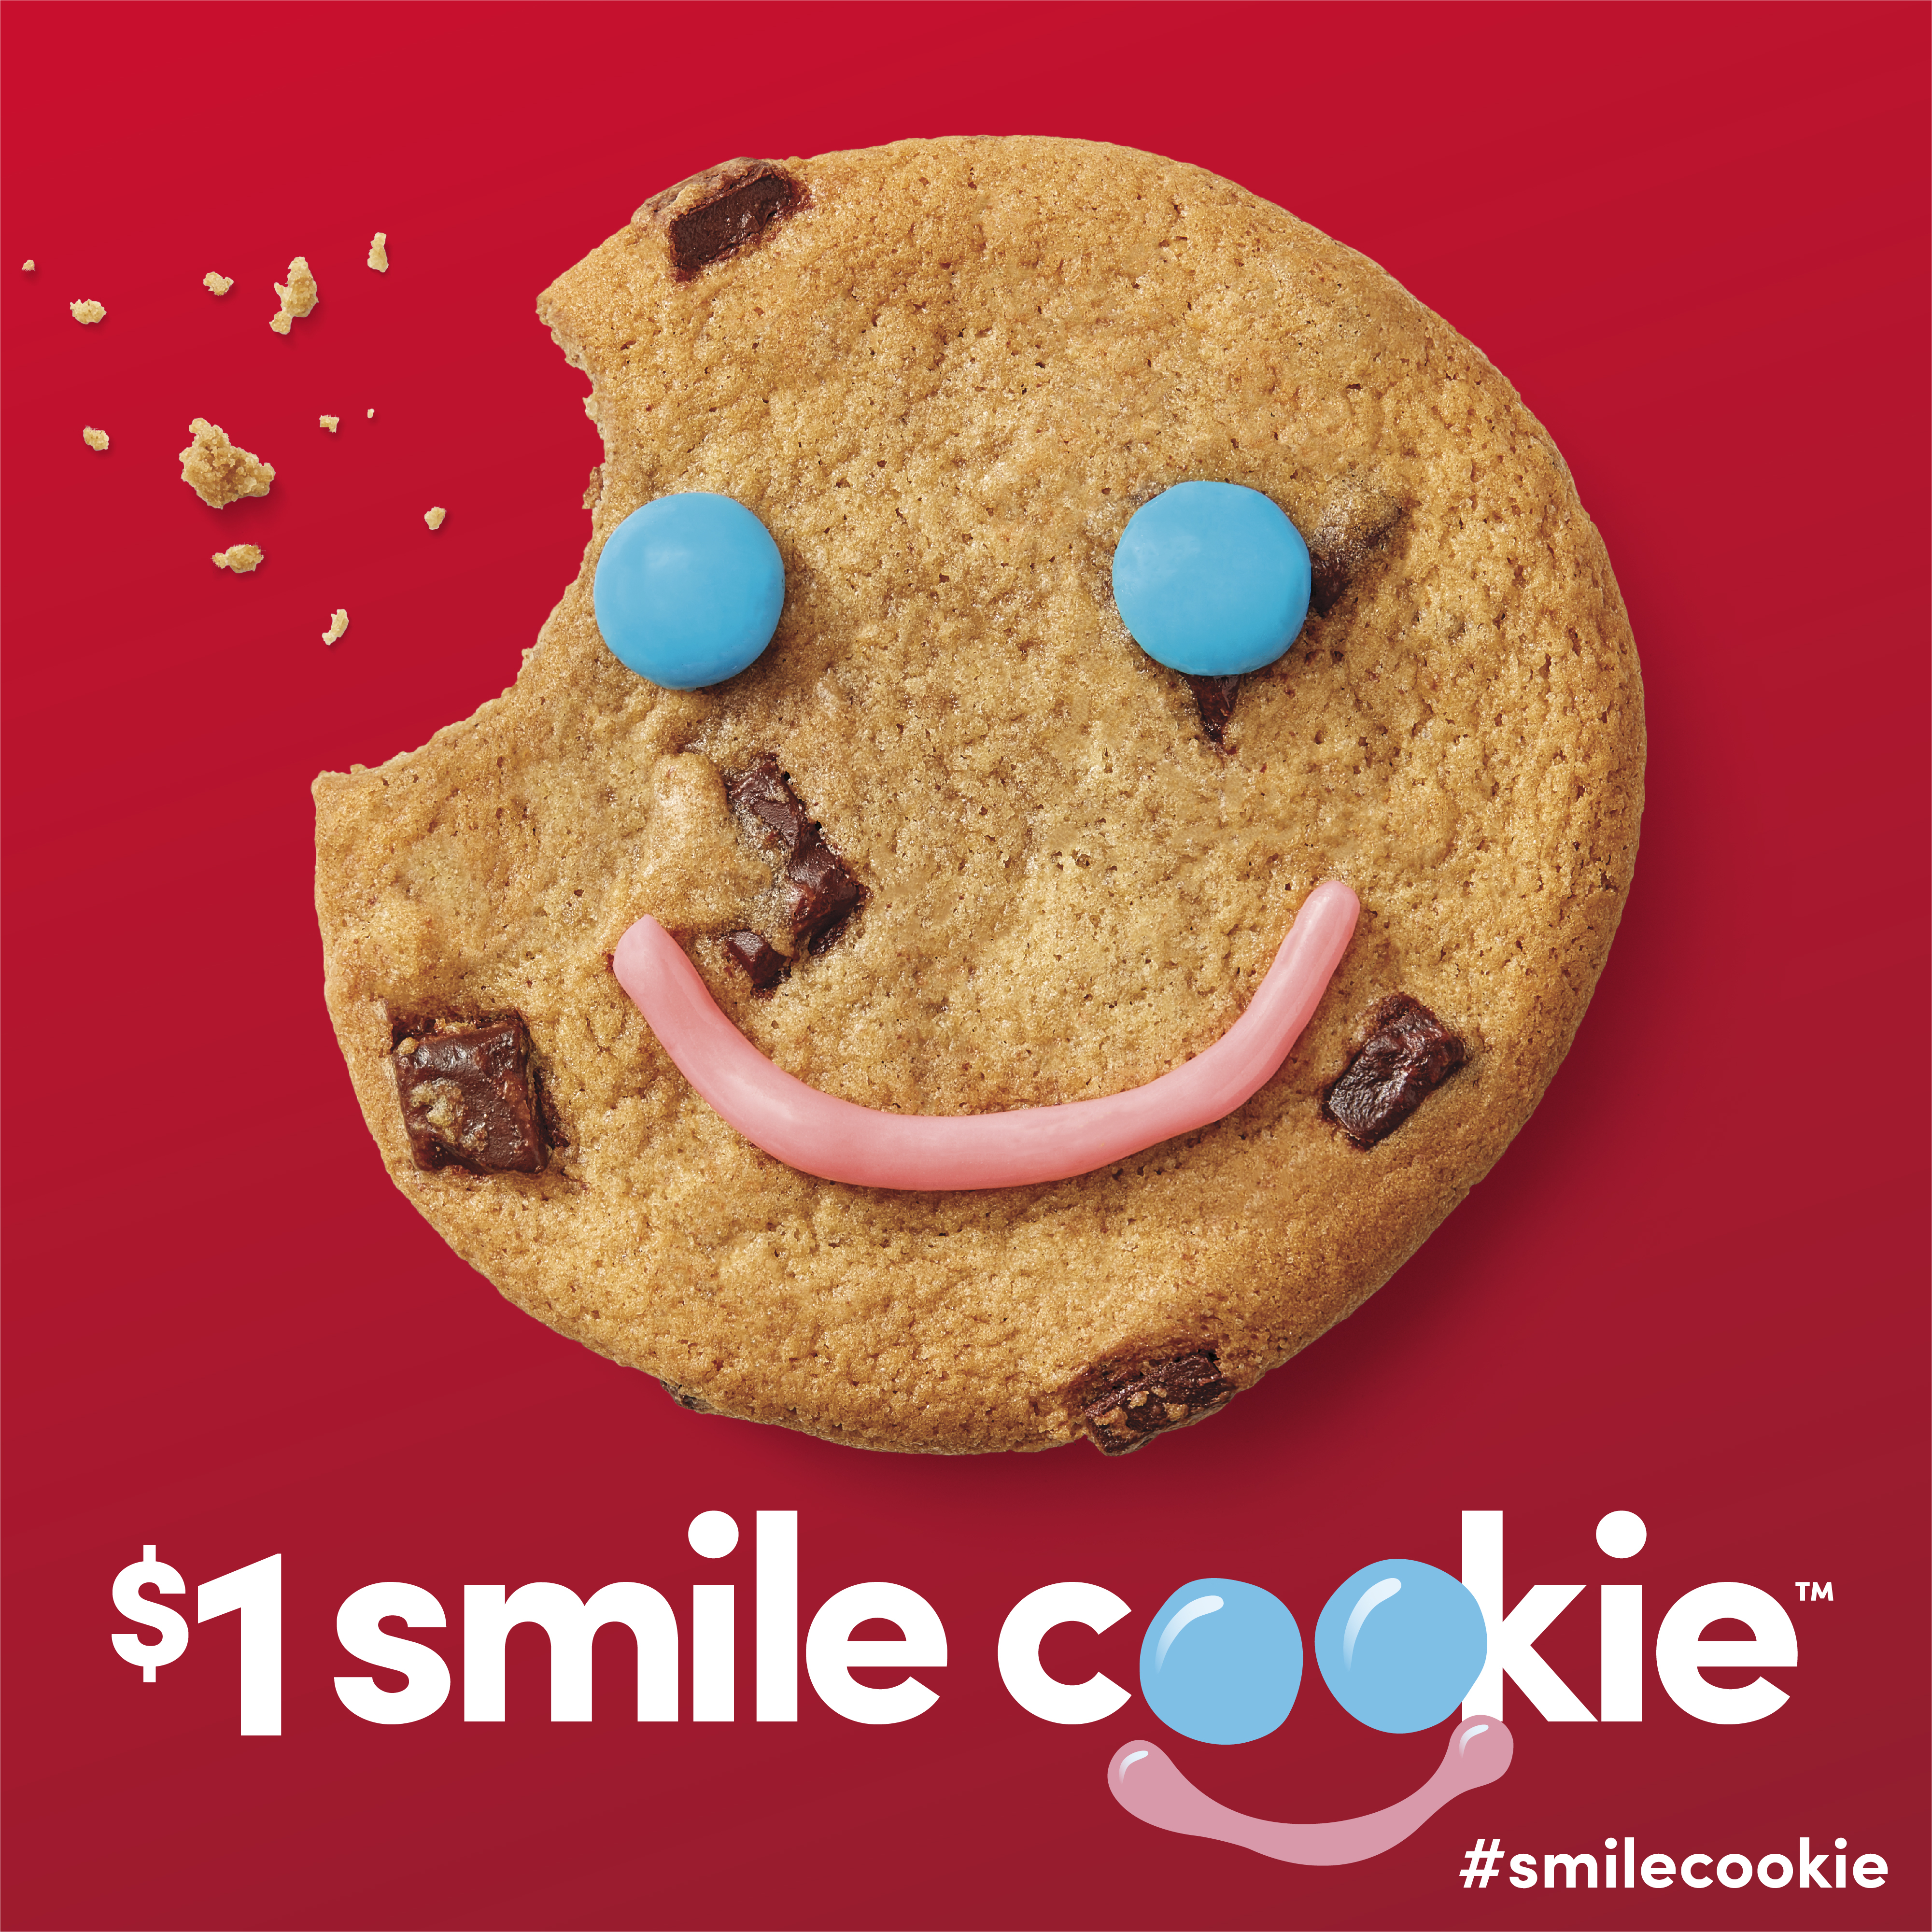 Get a Smile, a Smile and Make a Difference – Tim Hortons® Annual Smile Cookie™ Fundraiser Is Back Today | Business Wire